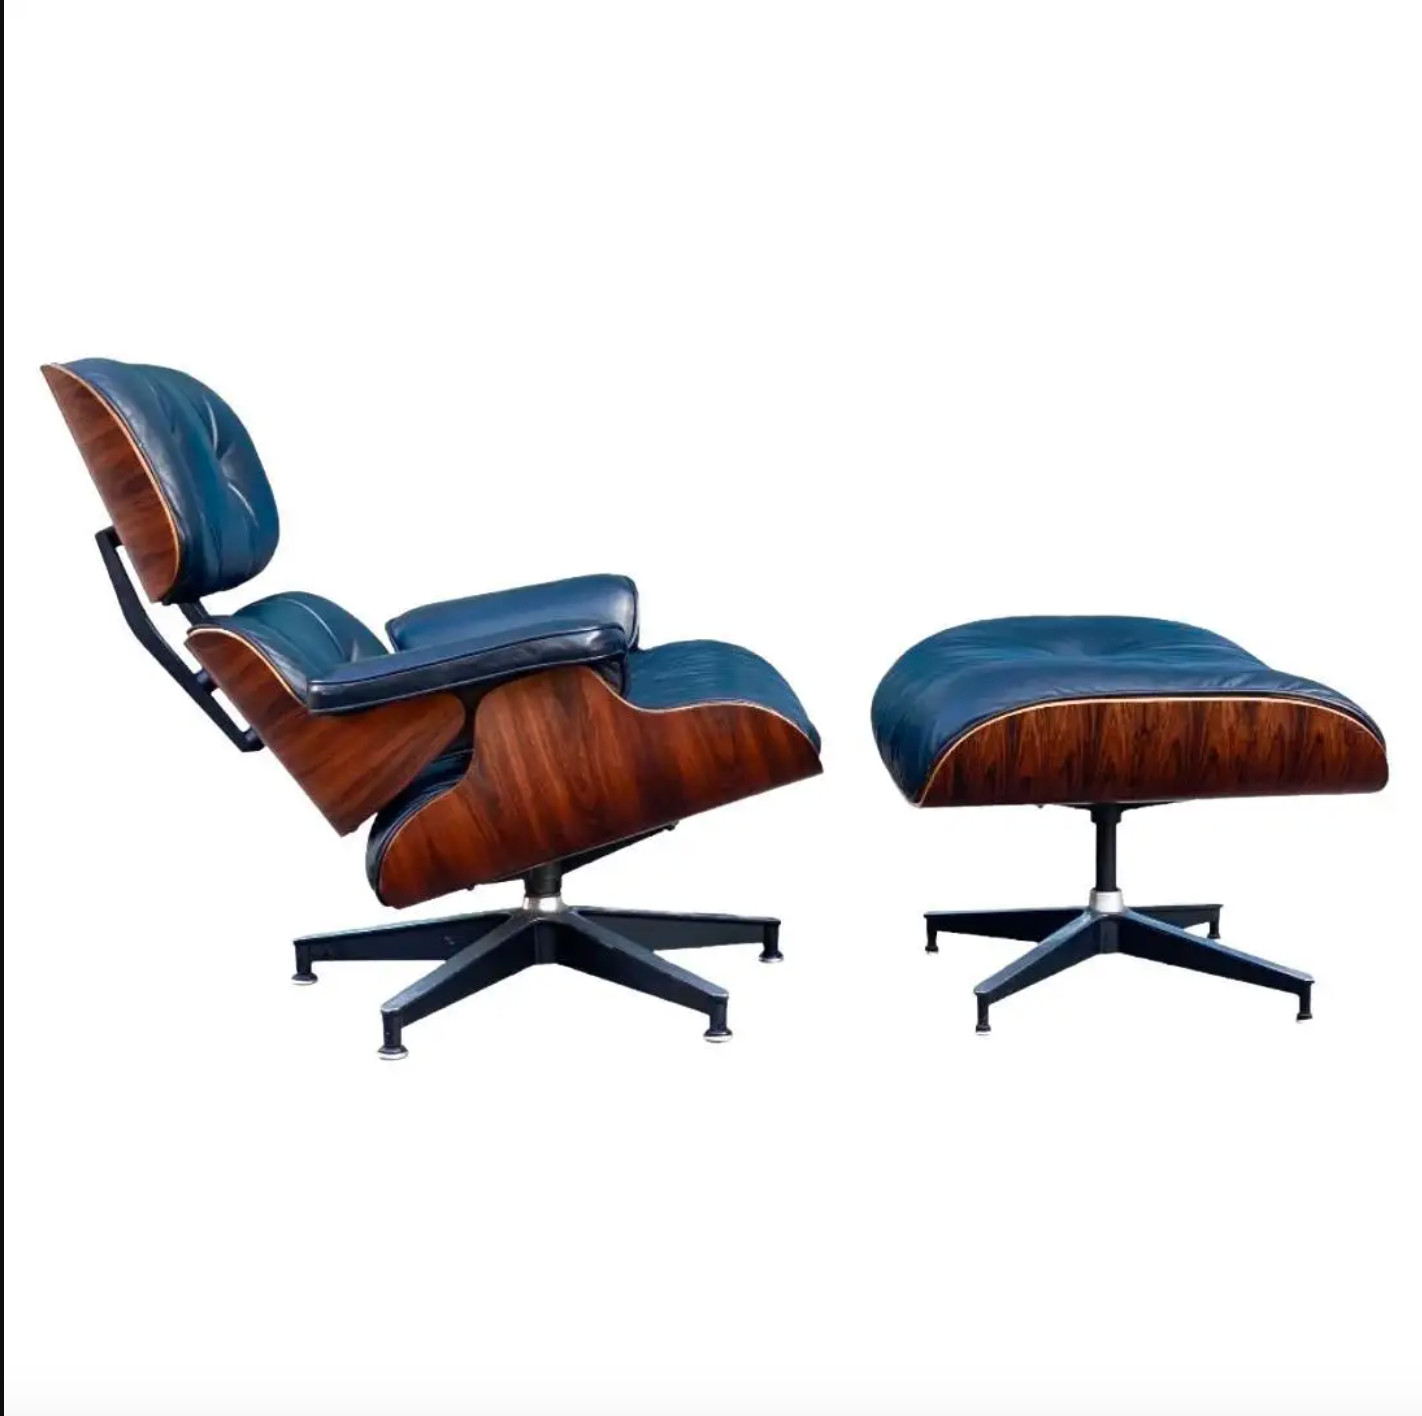 Refinement resultat Overflod The 5 Best Herman Miller Eames Lounge Chairs and Replicas